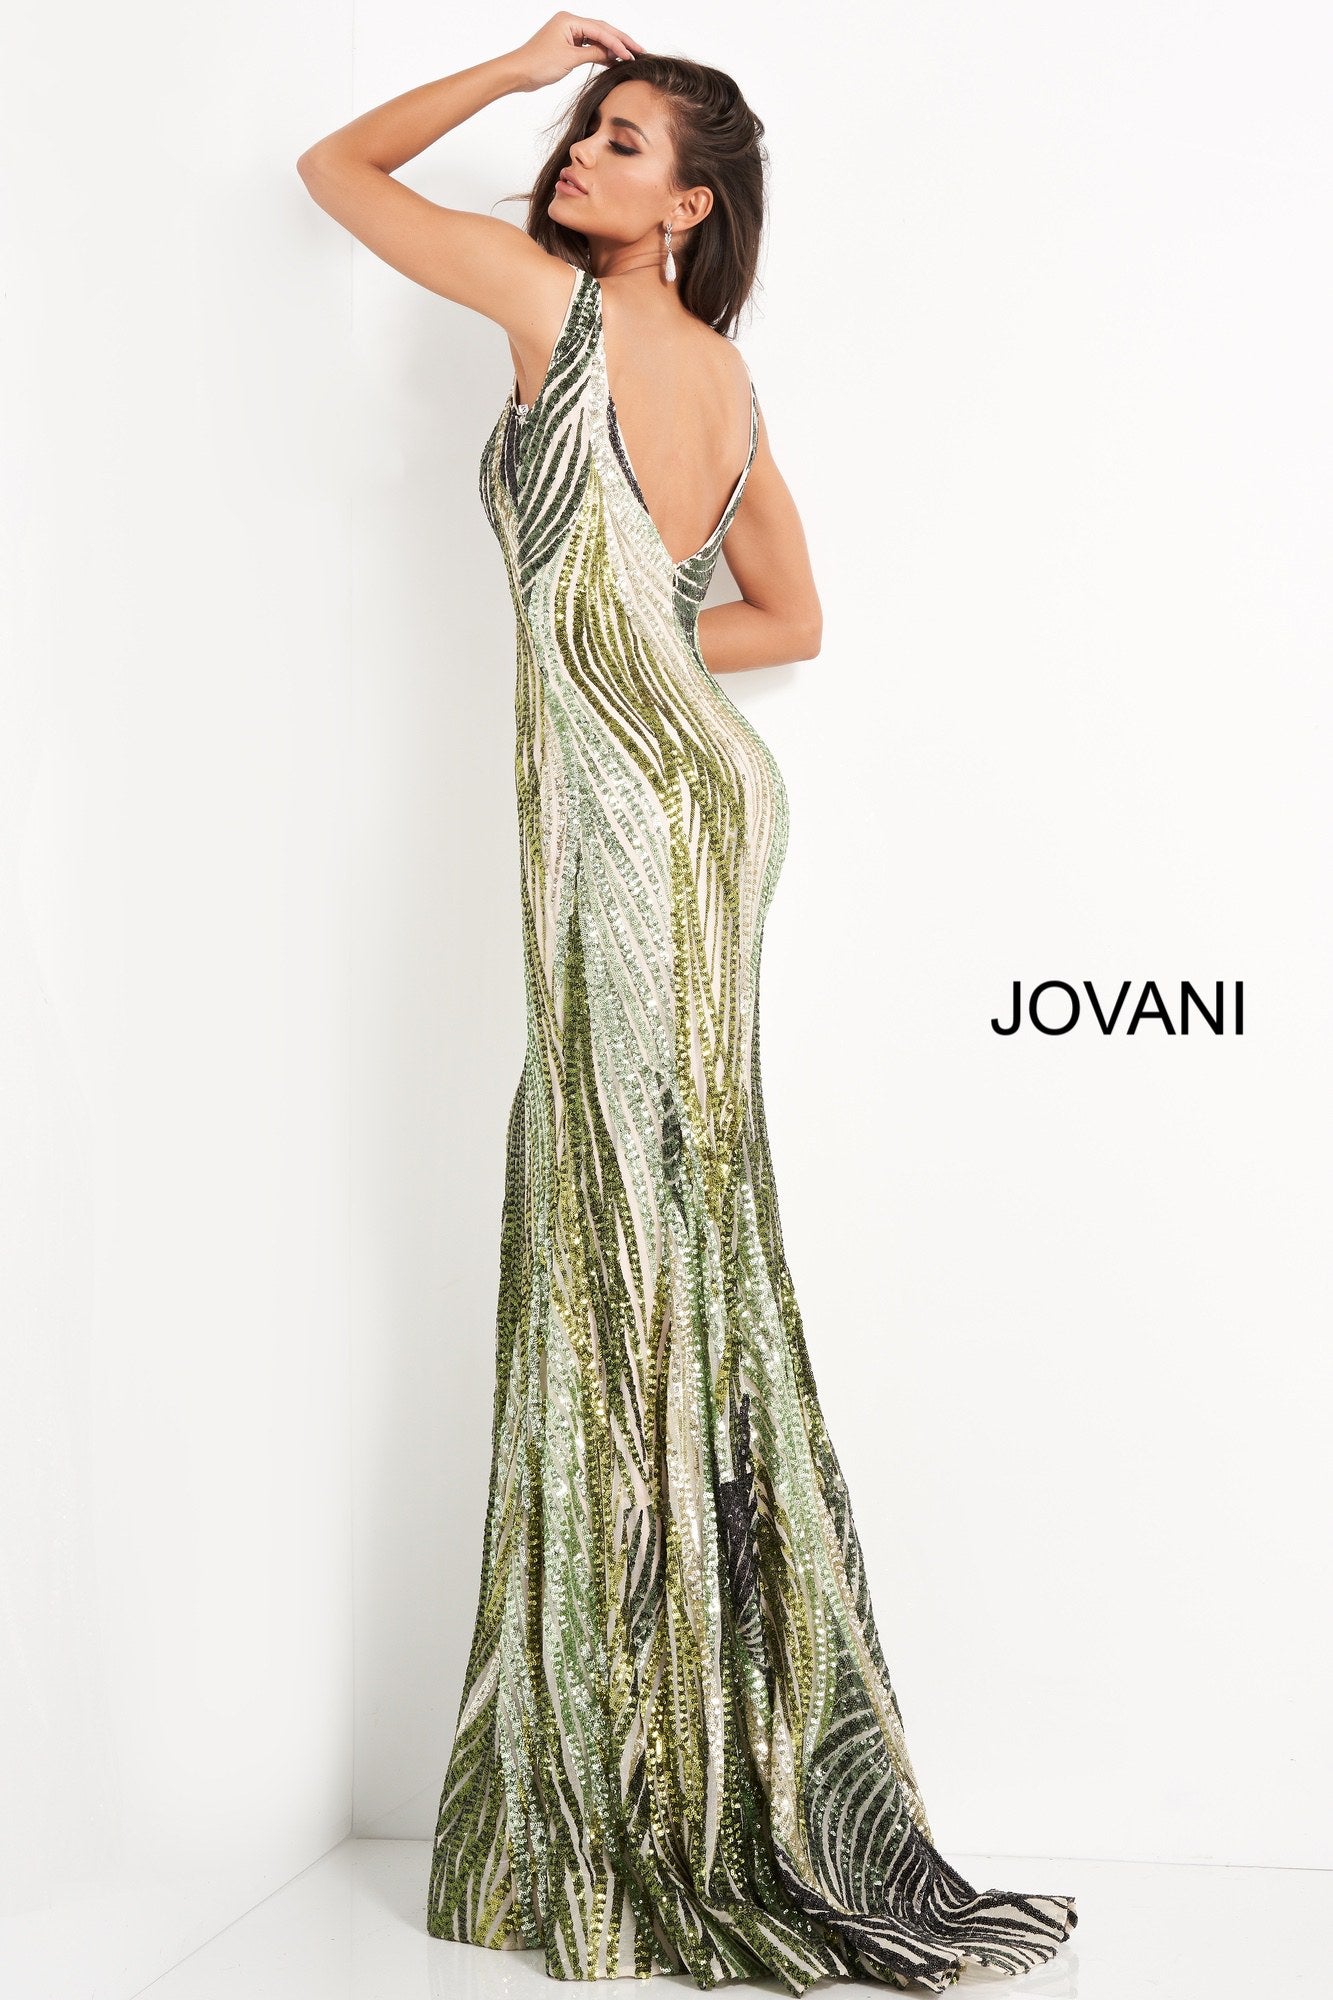 Jovani 05103 is a Long Fitted Mermaid Prom Dress. Featuring a Depp V Plunging Neckline with mesh insert. Green Sequin Multi Embellished Bodice cascading into the lush trumpet skirt. This Pageant Dress Features a sweeping train perfect for the stage!  Available Sizes: 00,0,2,4,6,8,10,12,14,16,18,20,22,24  Available Colors: Green